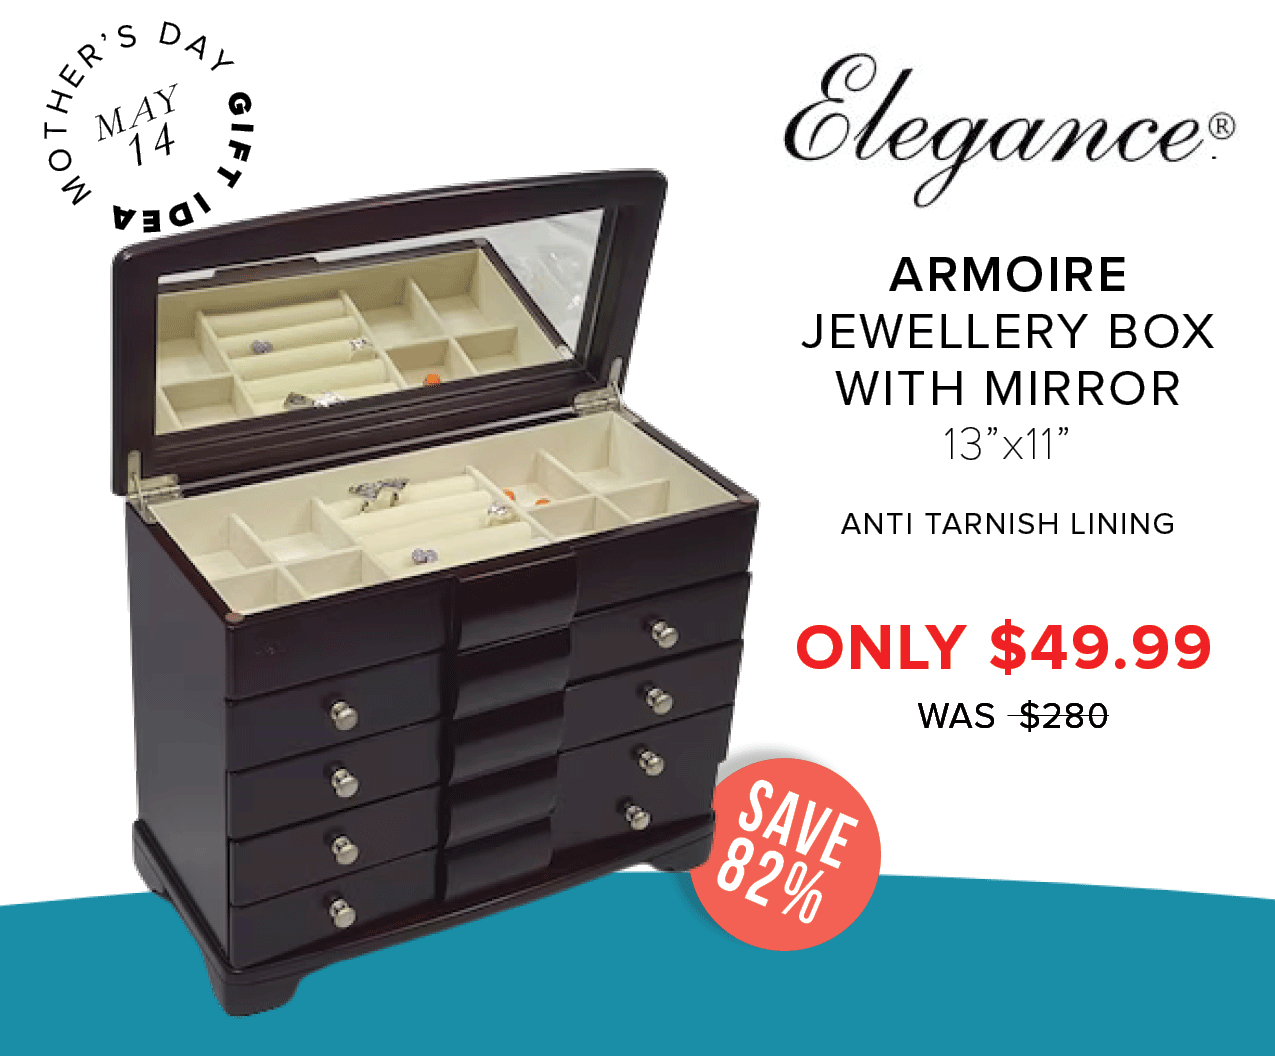  ARMOIRE JEWELLERY BOX WITH MIRROR 13"%x11" ANTI TARNISH LINING ONLY $49.99 WAS $280 